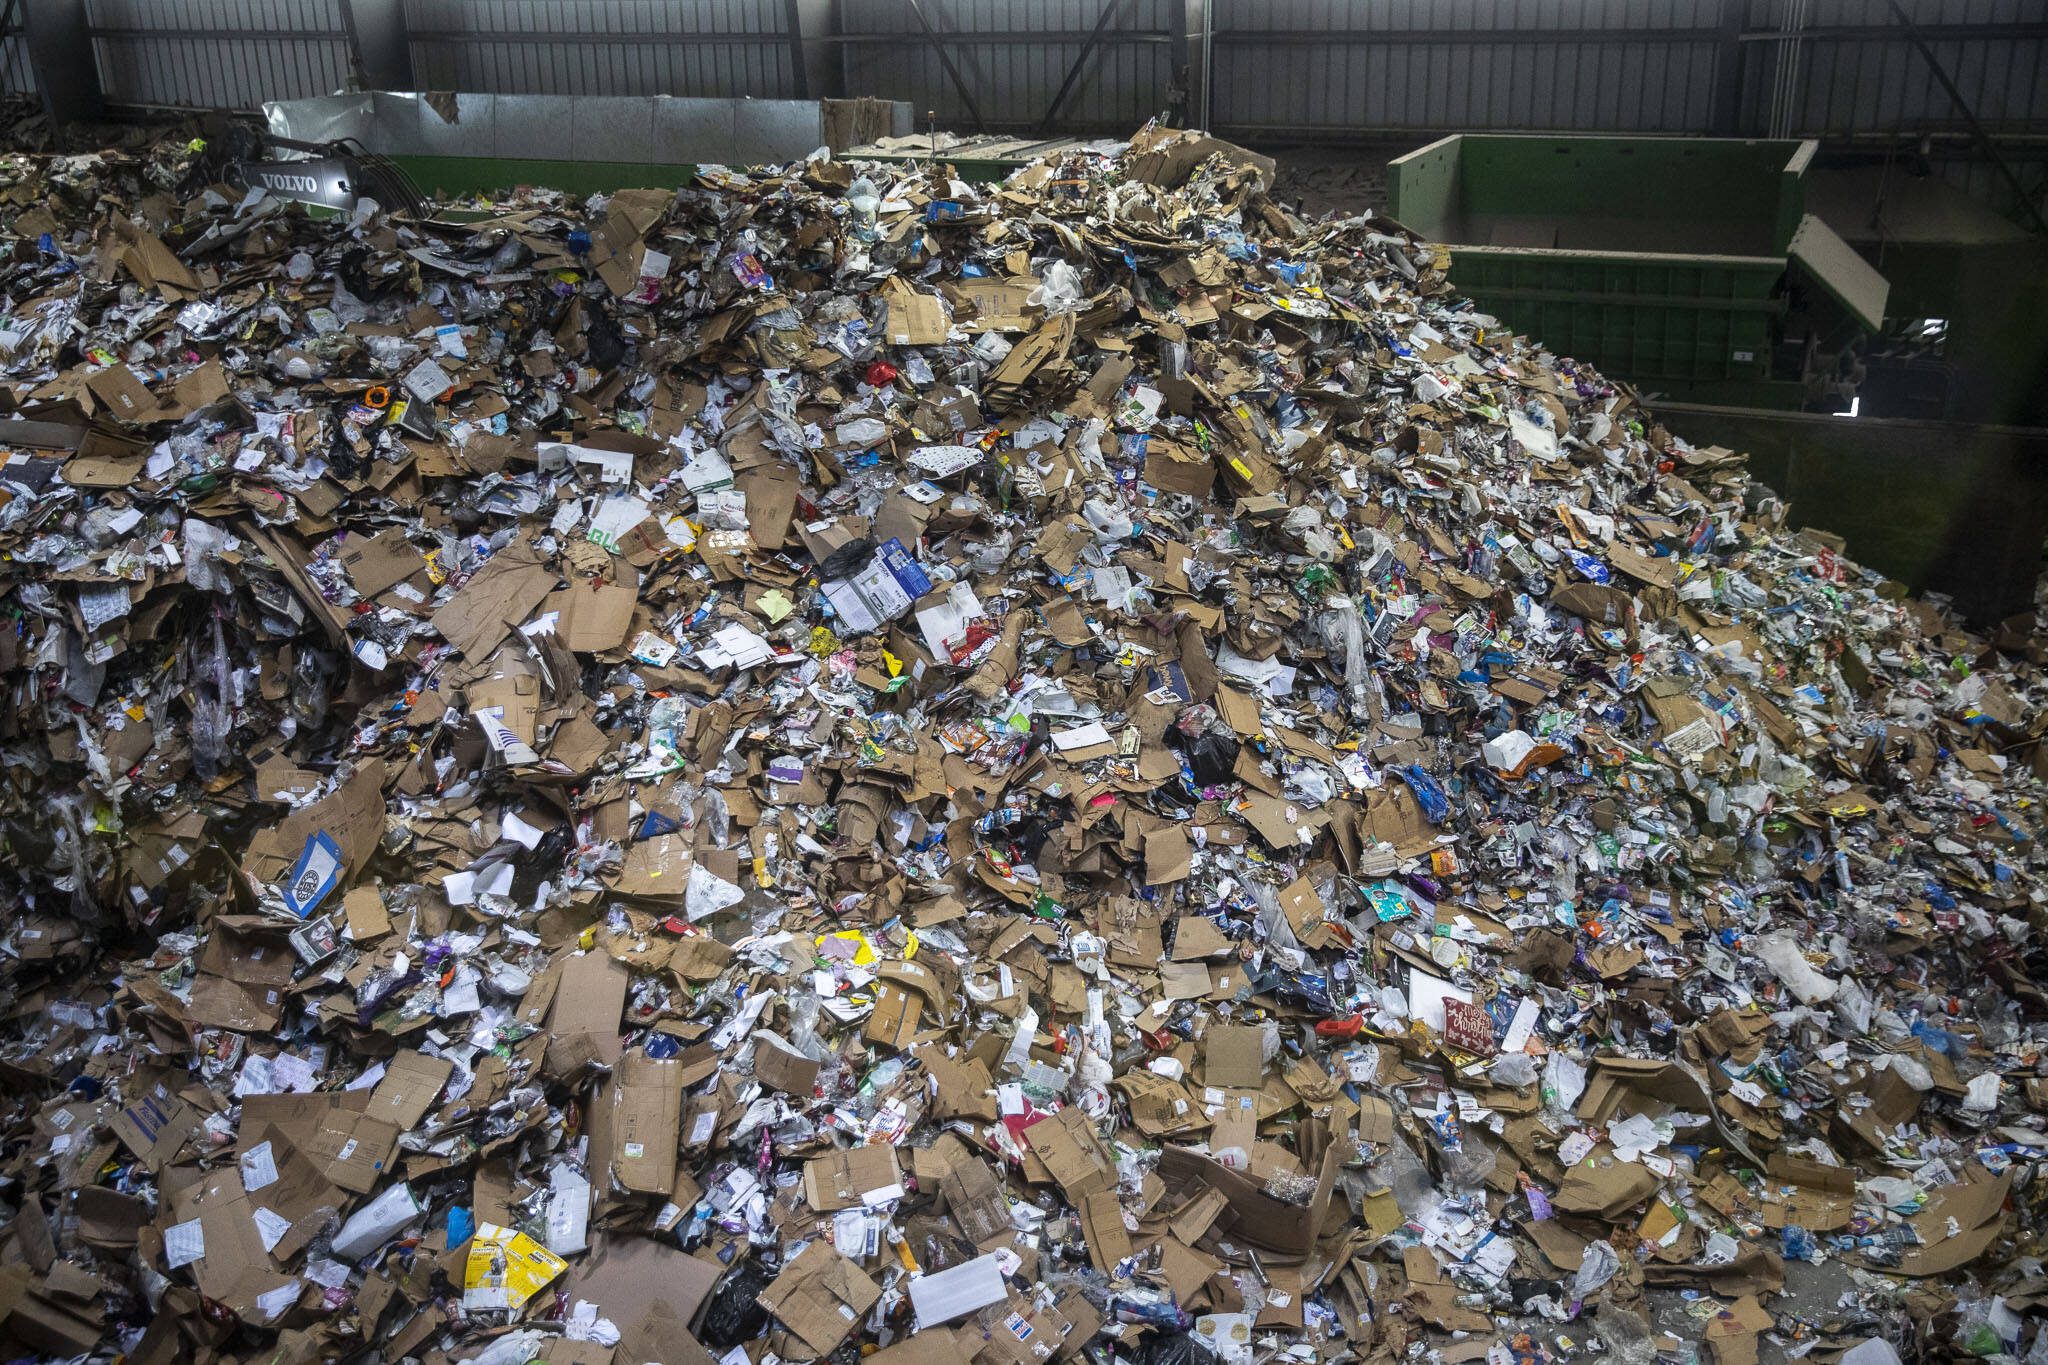 Items are sorted for recycling inside the Waste Management Cascade Recycling Center in Woodinville, Washington on Wednesday, Nov. 1, 2023. (Annie Barker / The Herald)